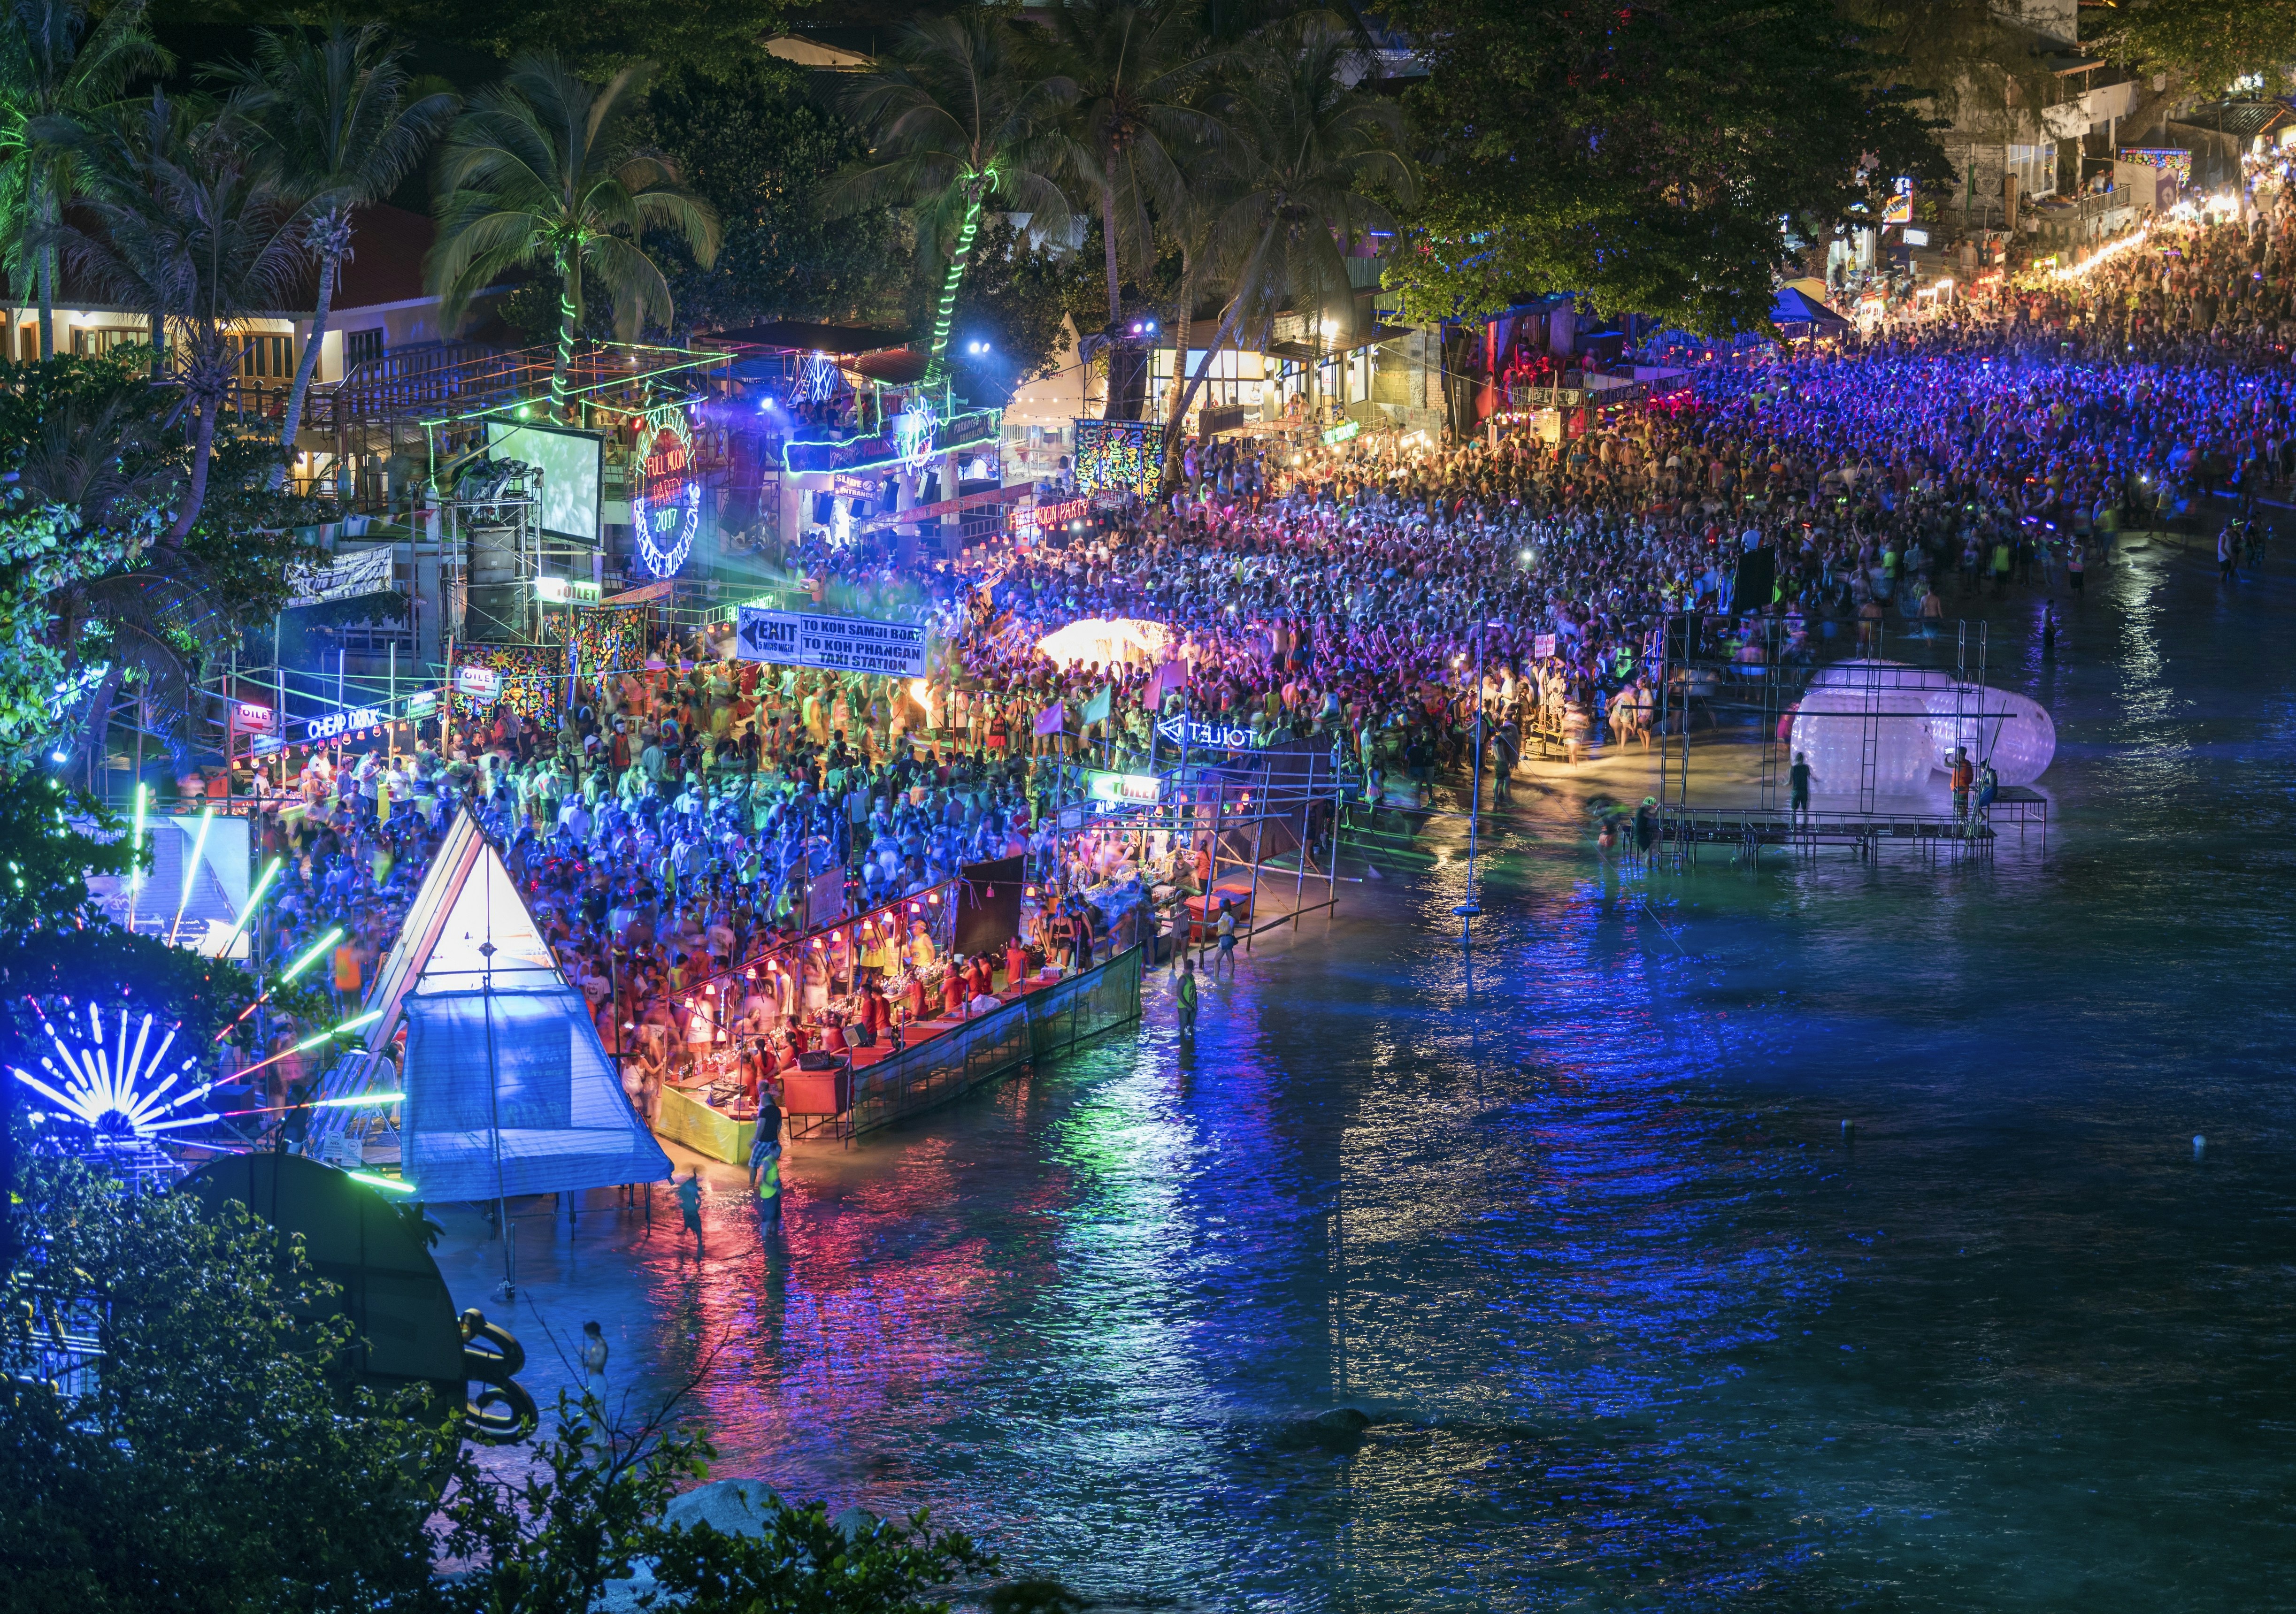 An aerial view of the crowds of people attending the Full Moon Party on Haad Rin beach, Thailand. The beach is completely swamped by people, with lasers and lights painting the crowds in different colours.